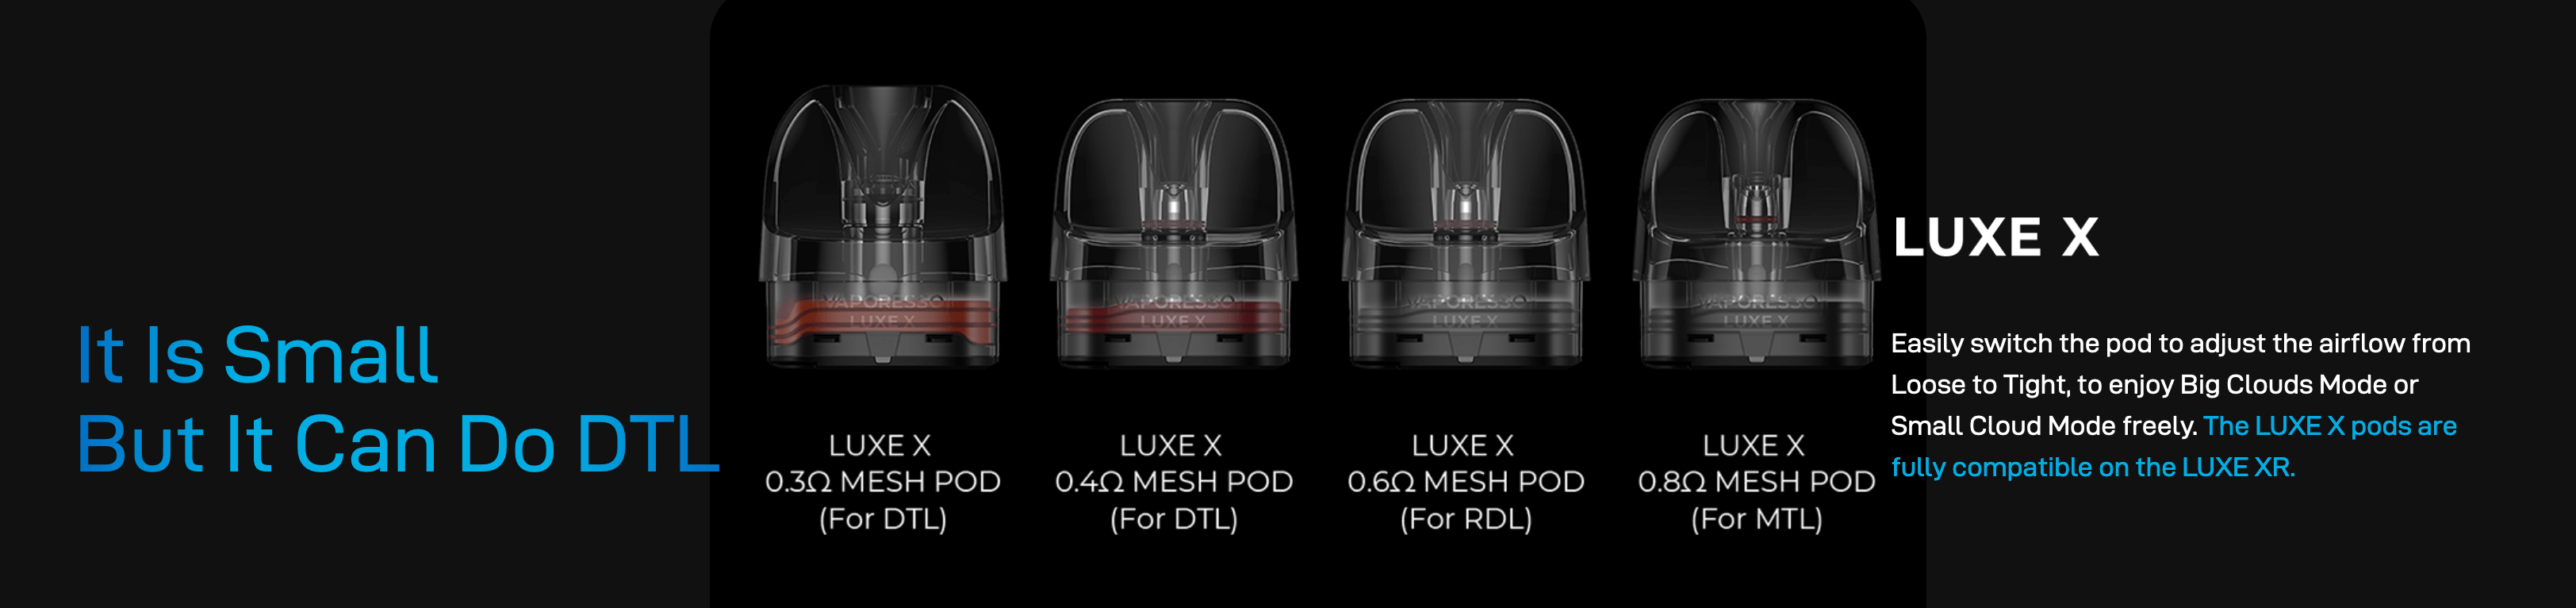 Vaporesso Luxe X Vape Kit - capable of DTL, RDTL and MTL with a simple switch of pod resistance.